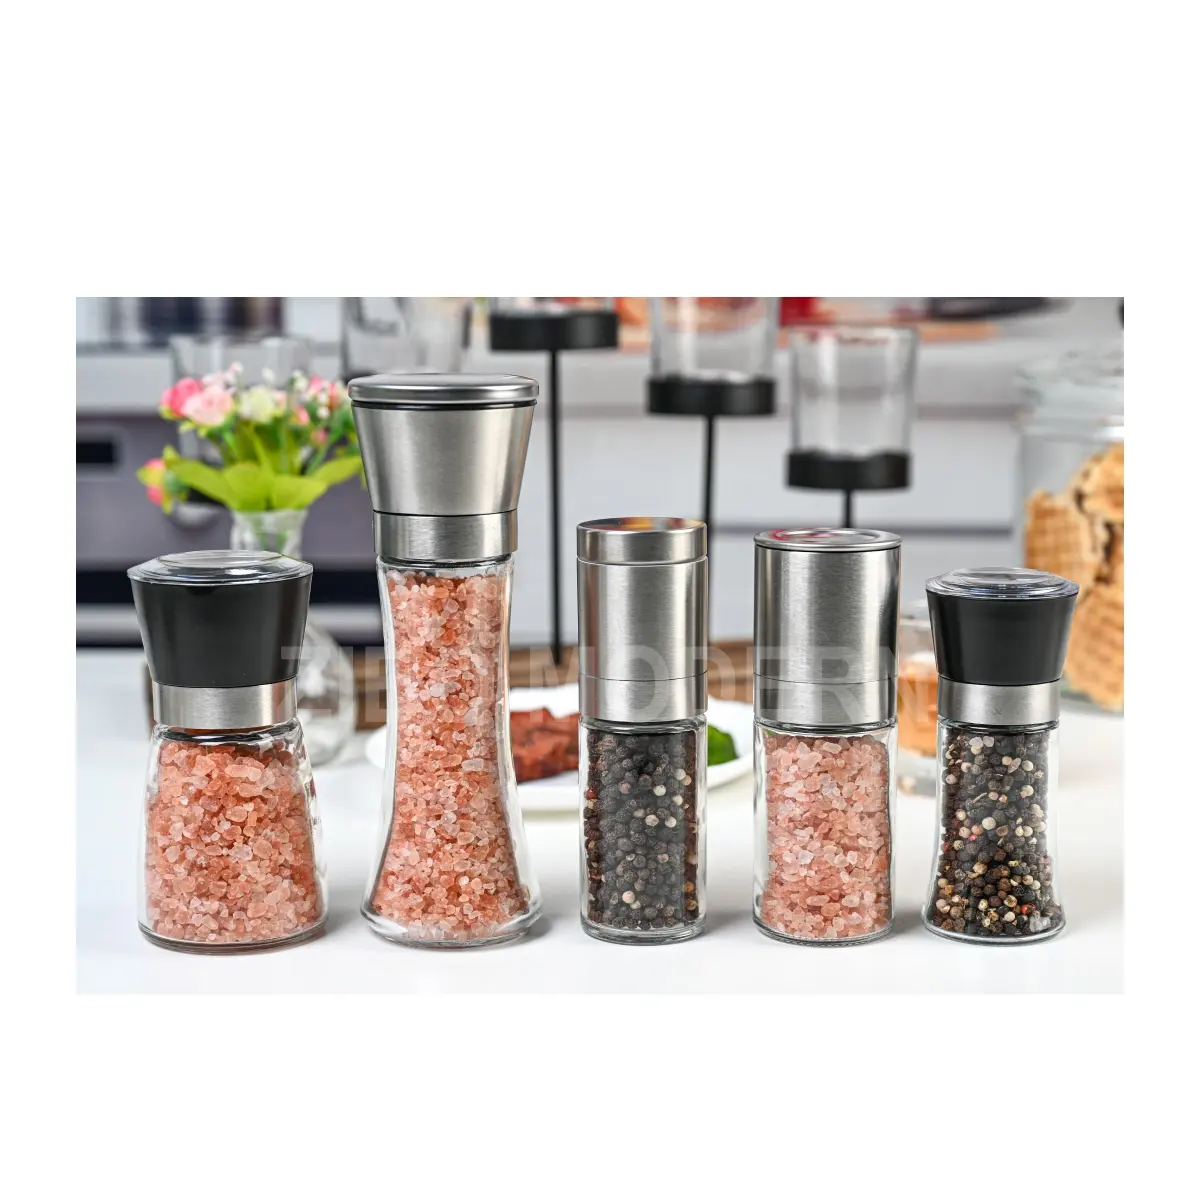 Commercio all'ingrosso di Alta Qualità In Acciaio Inox <span class=keywords><strong>Pepe</strong></span> Herb Sale Spice Mill Grinder, herb/Piccante Grinder/Macina Sale, <span class=keywords><strong>Pepe</strong></span> Mulino